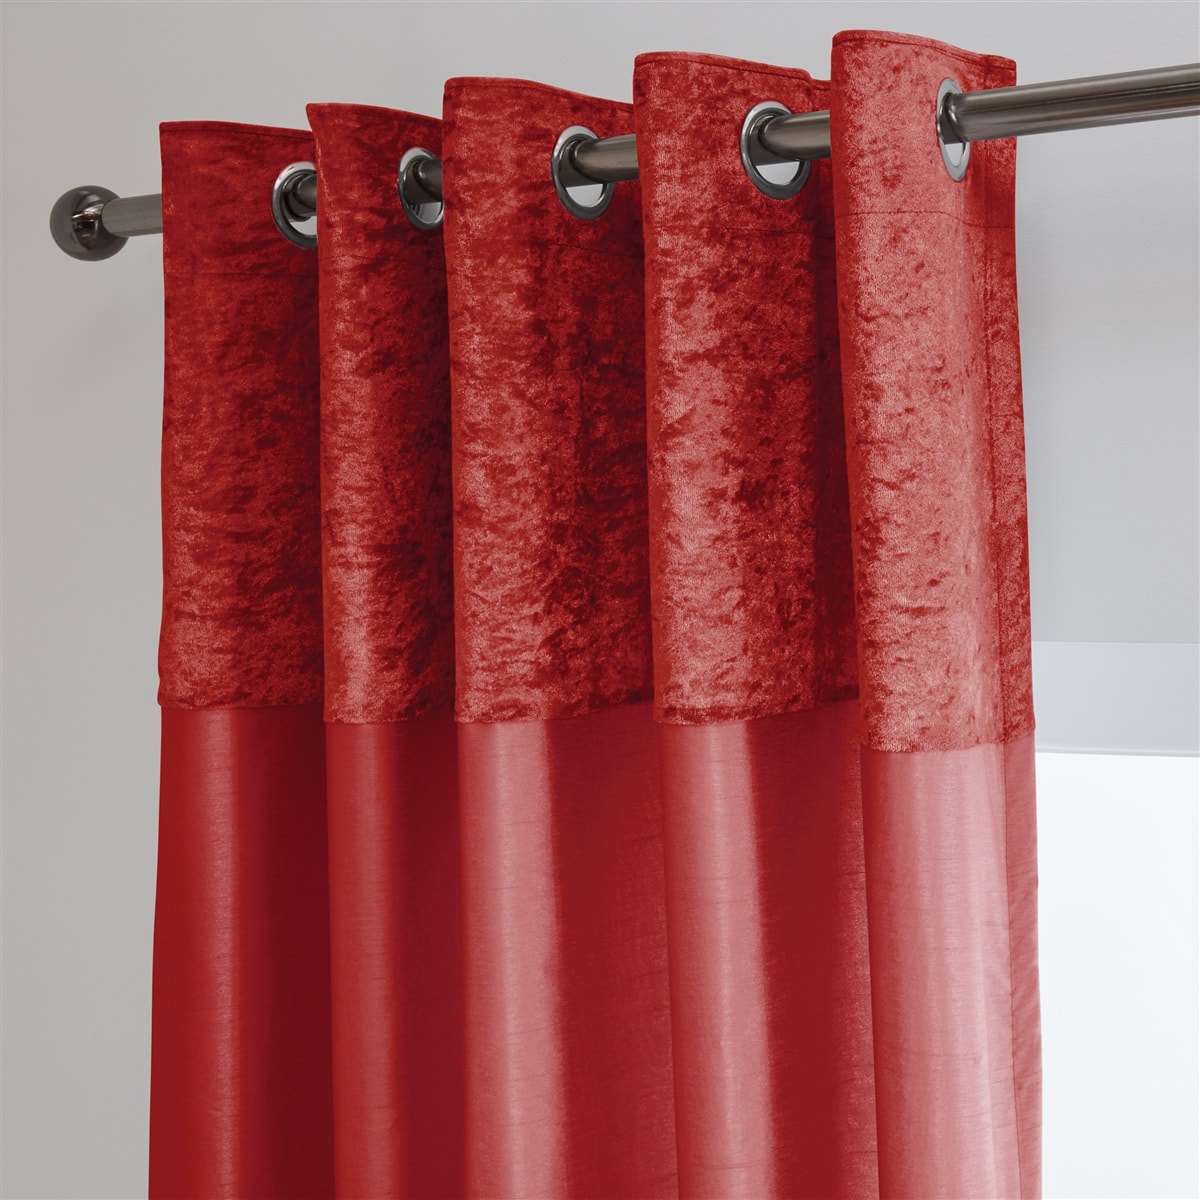 Chloe Crushed Velvet Band Fully Lined Faux Silk Eyelet Curtains (Red)